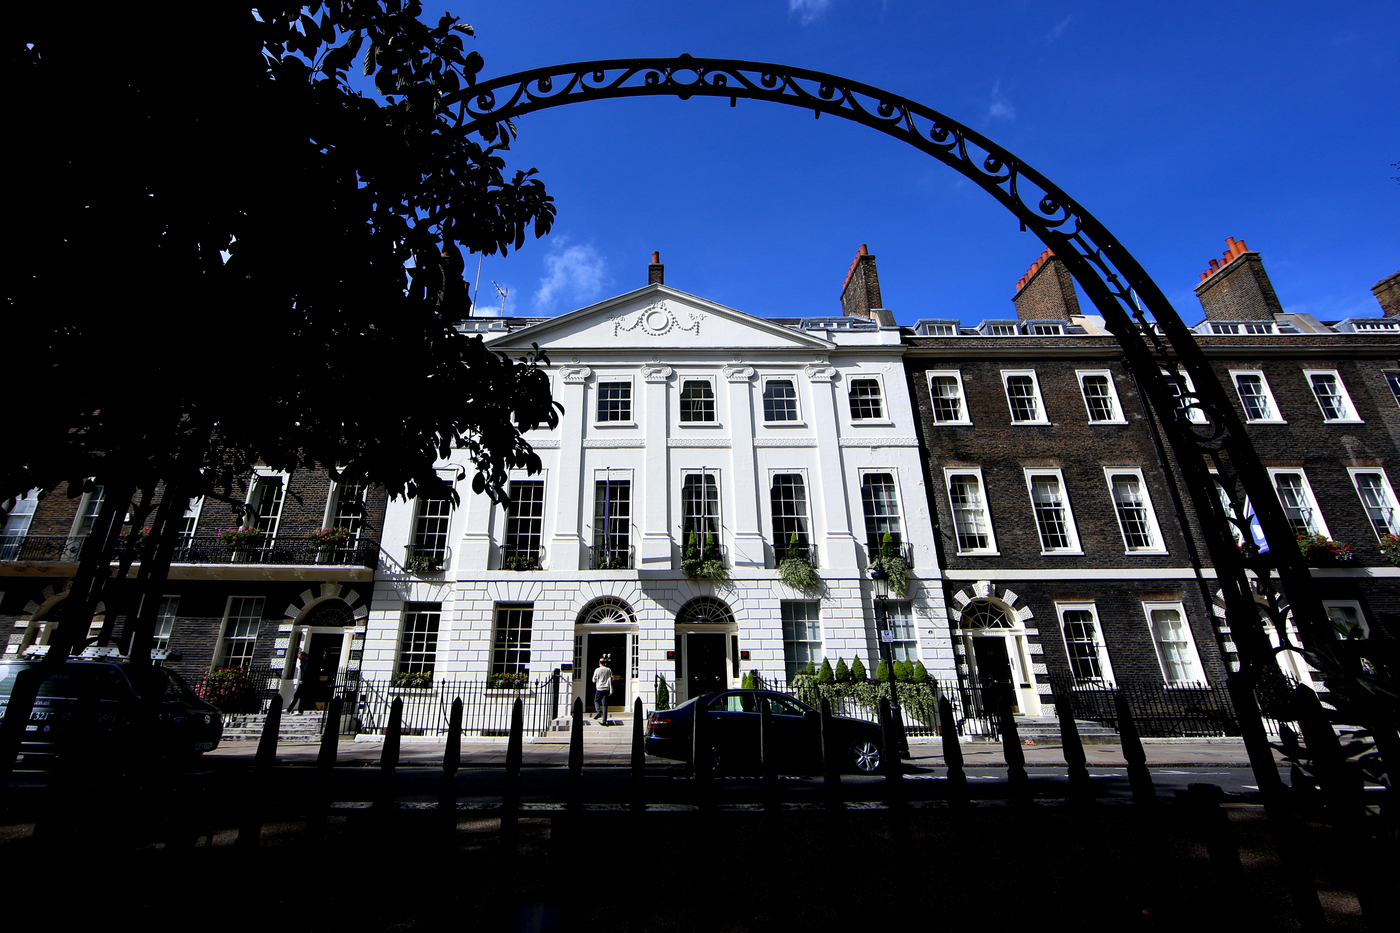 New College of the Humanities NCH - London - Feature